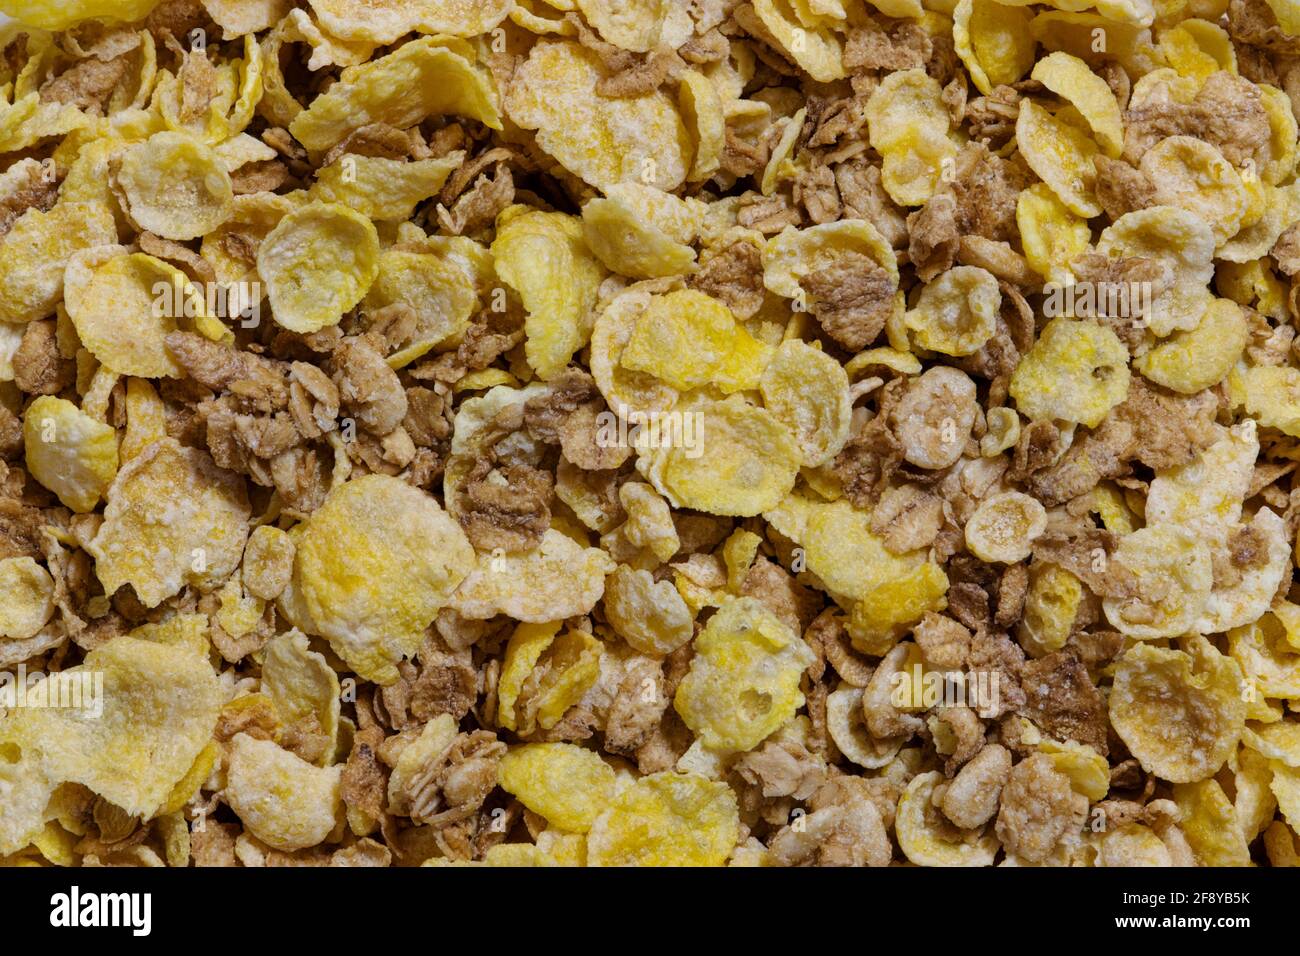 Dry breakfast cereal whole grains, granola and oat flakes concept background image. Stock Photo